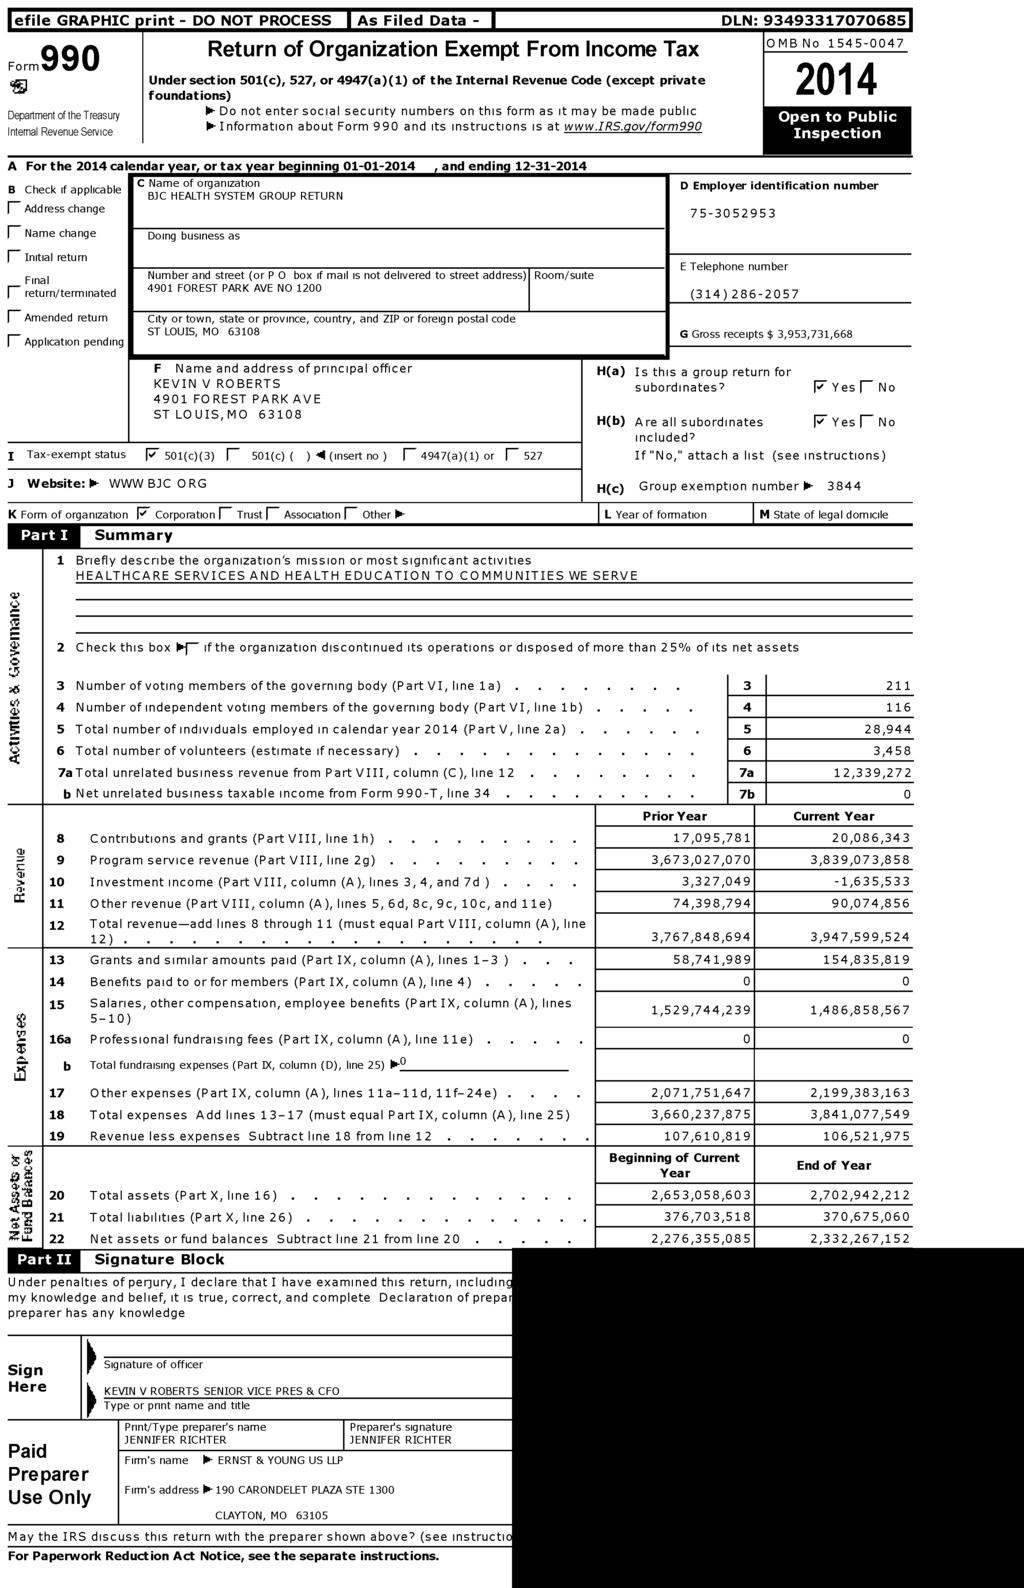 lefile GRAPHIC print - DO NOT PROCESS I As Filed Data - I DLN: 934933170706851 OMB No 1545-0047 990 Return of Organization Exempt From Income Tax Form Under section 501 (c), 527, or 4947 ( a)(1) of